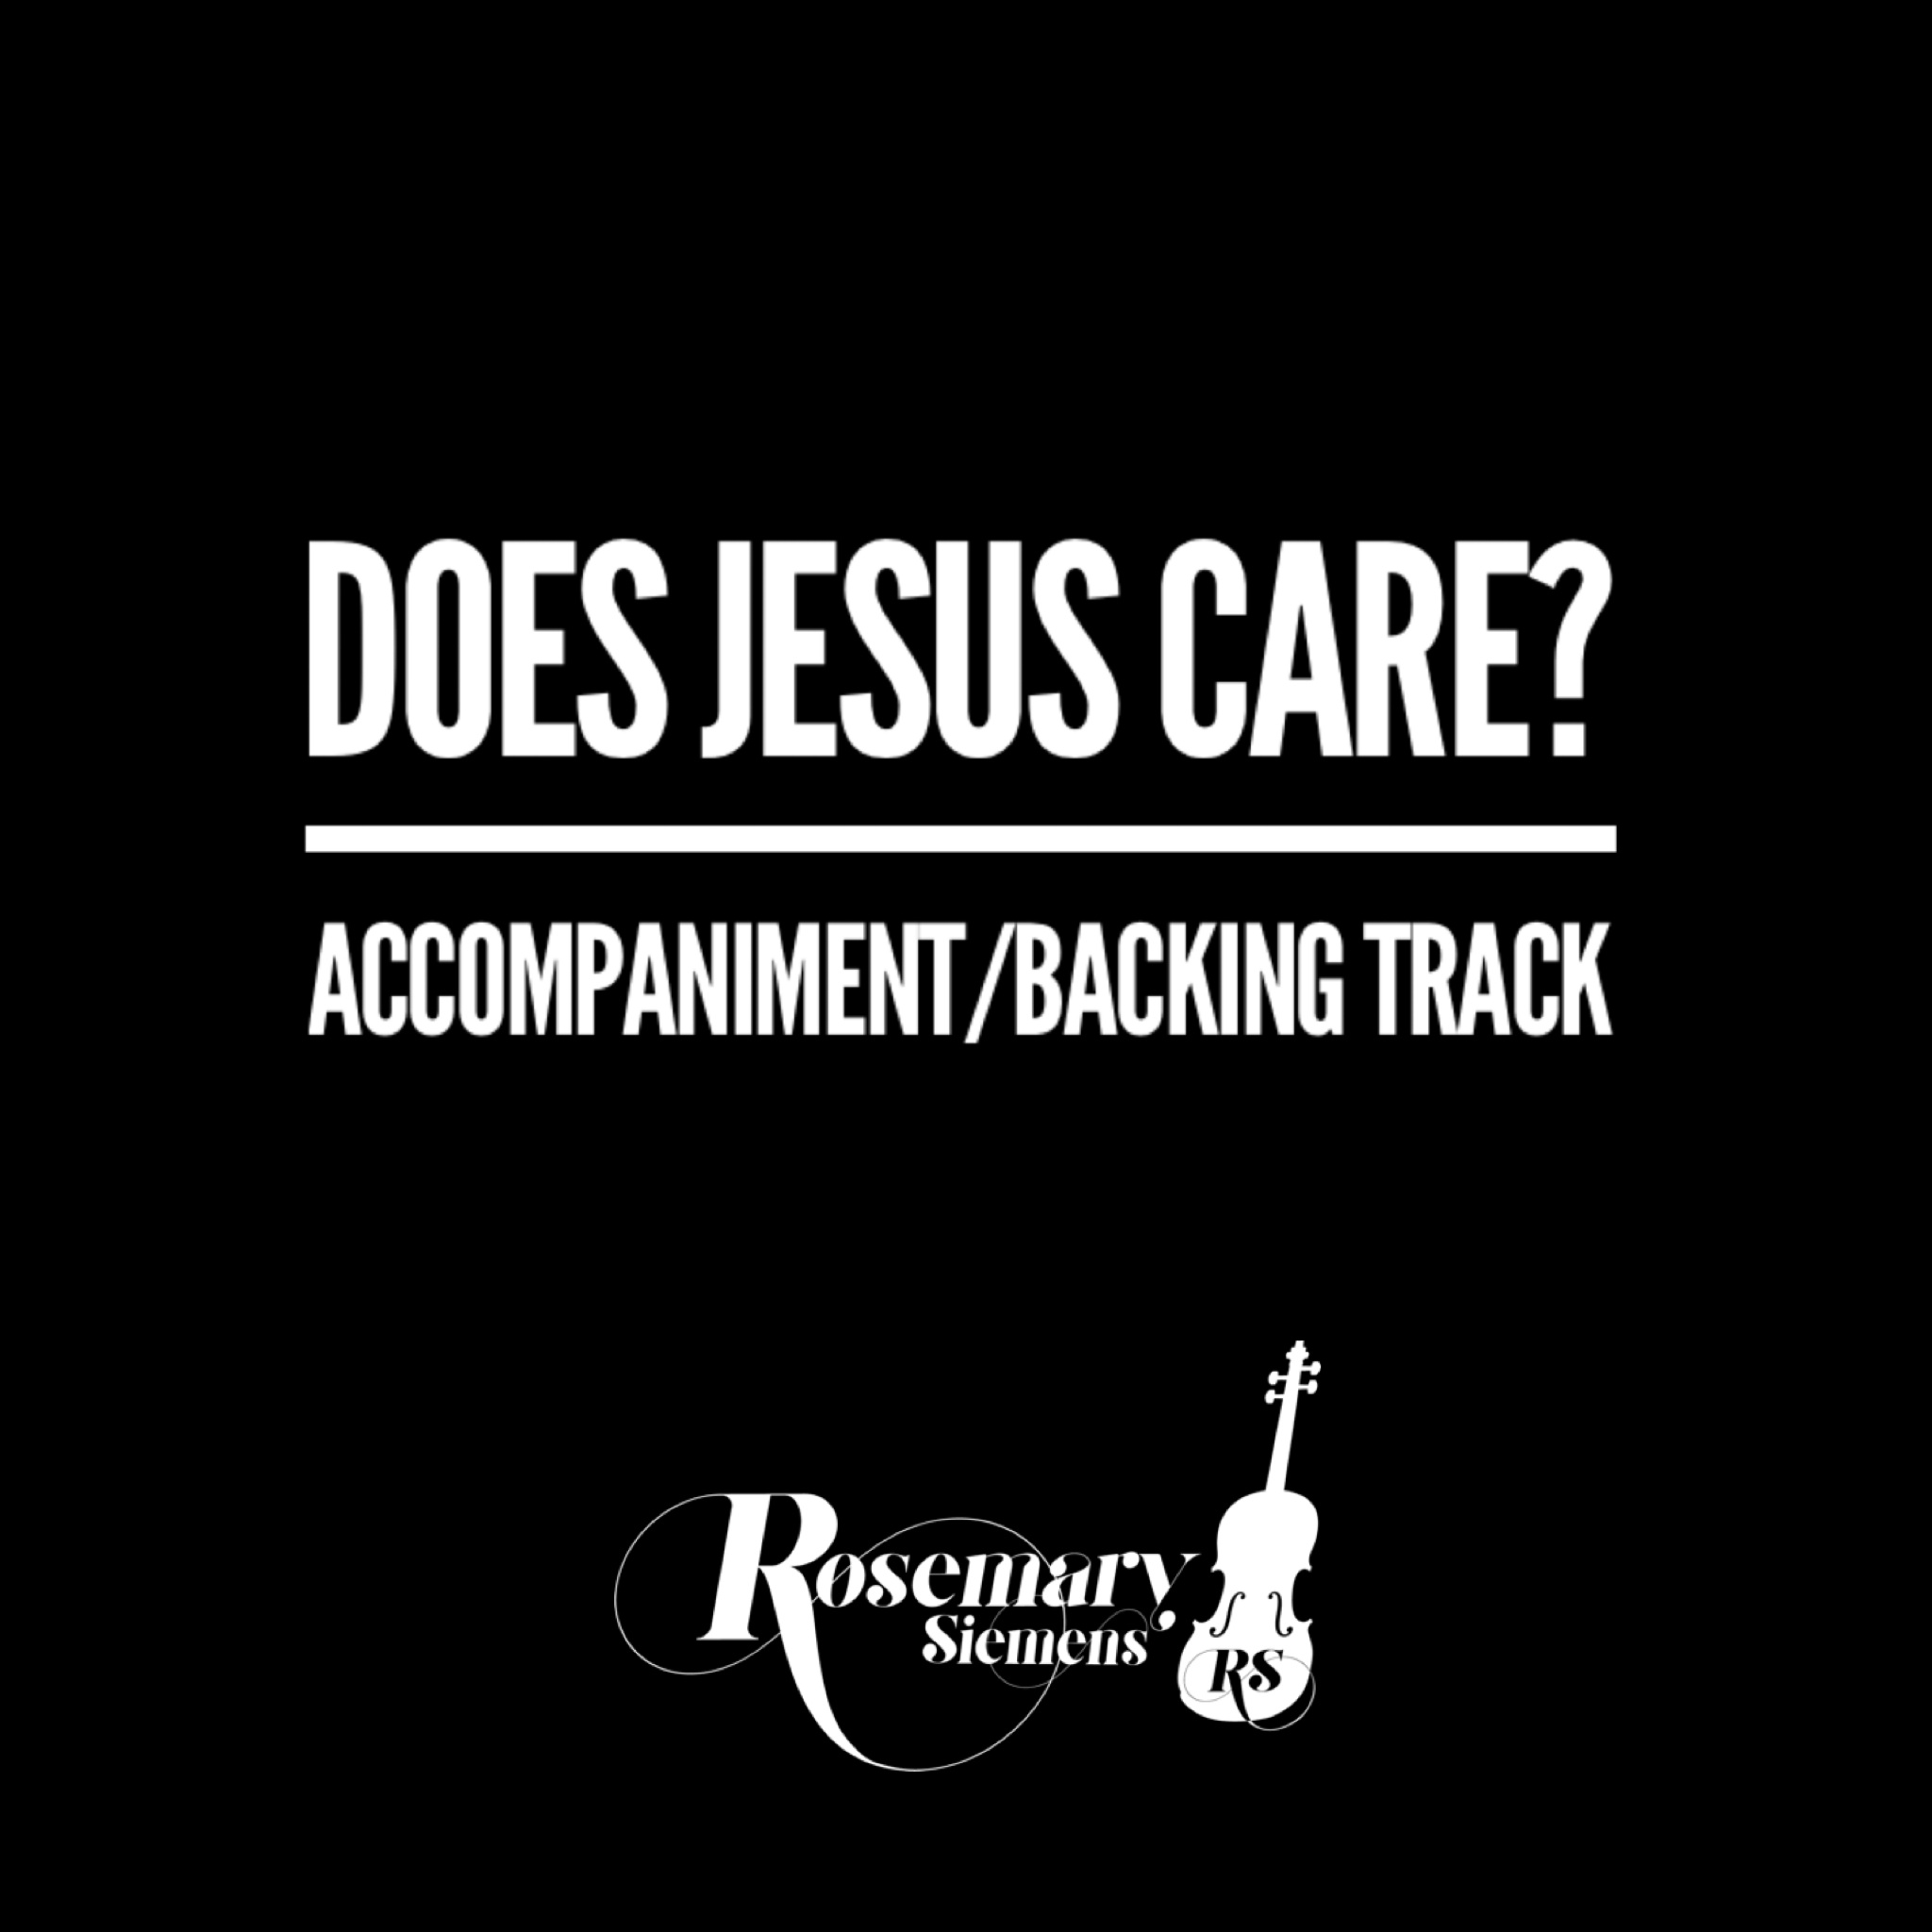 Does Jesus Care Rosemary Siemens Accompaniment Backing Track